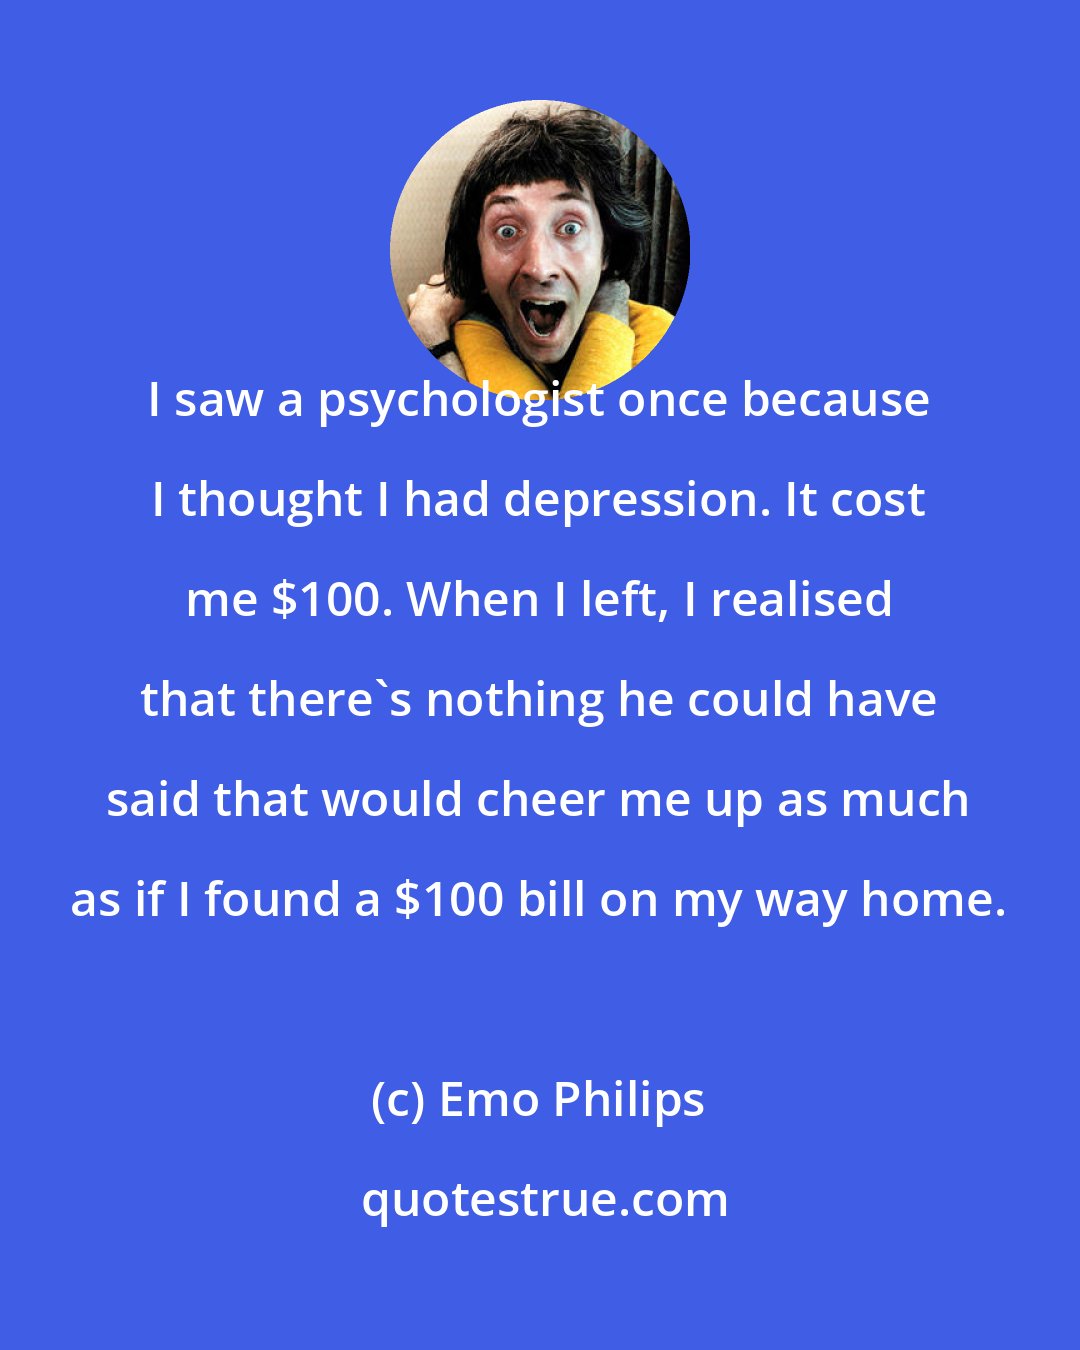 Emo Philips: I saw a psychologist once because I thought I had depression. It cost me $100. When I left, I realised that there's nothing he could have said that would cheer me up as much as if I found a $100 bill on my way home.